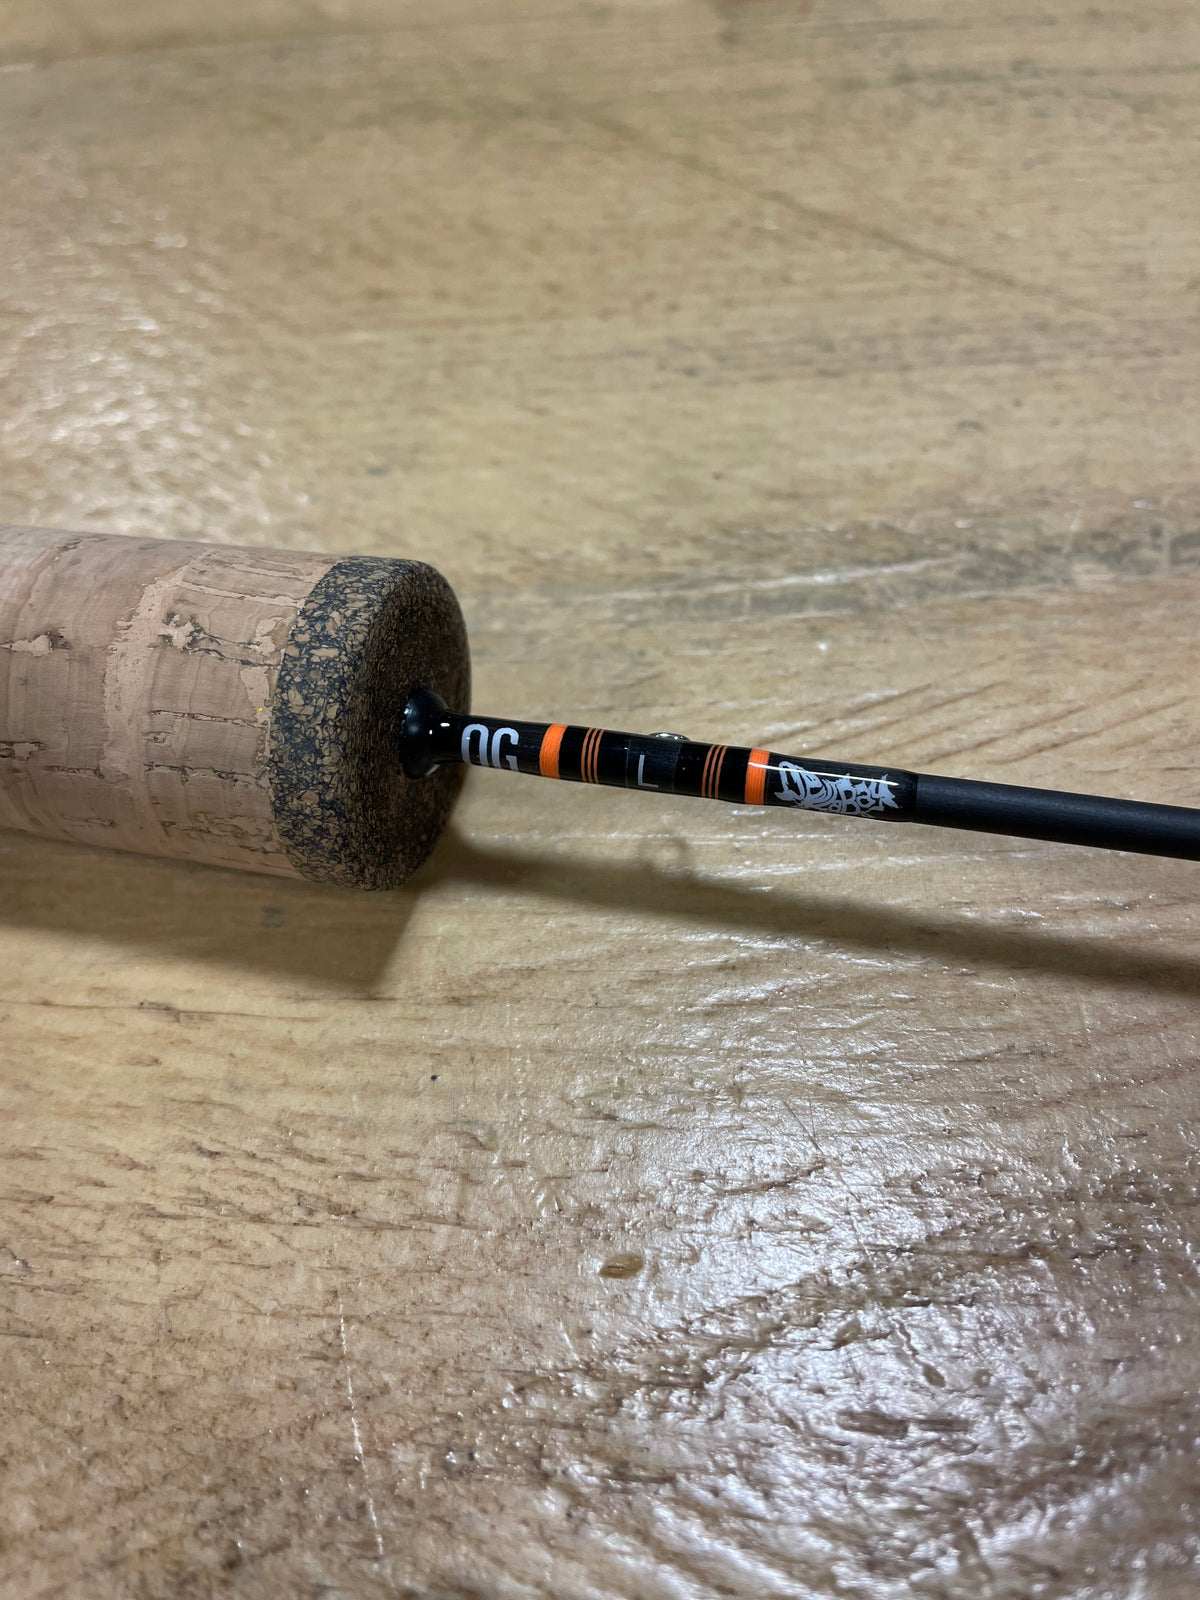 Ice Pro Jigging Rod with reel seat